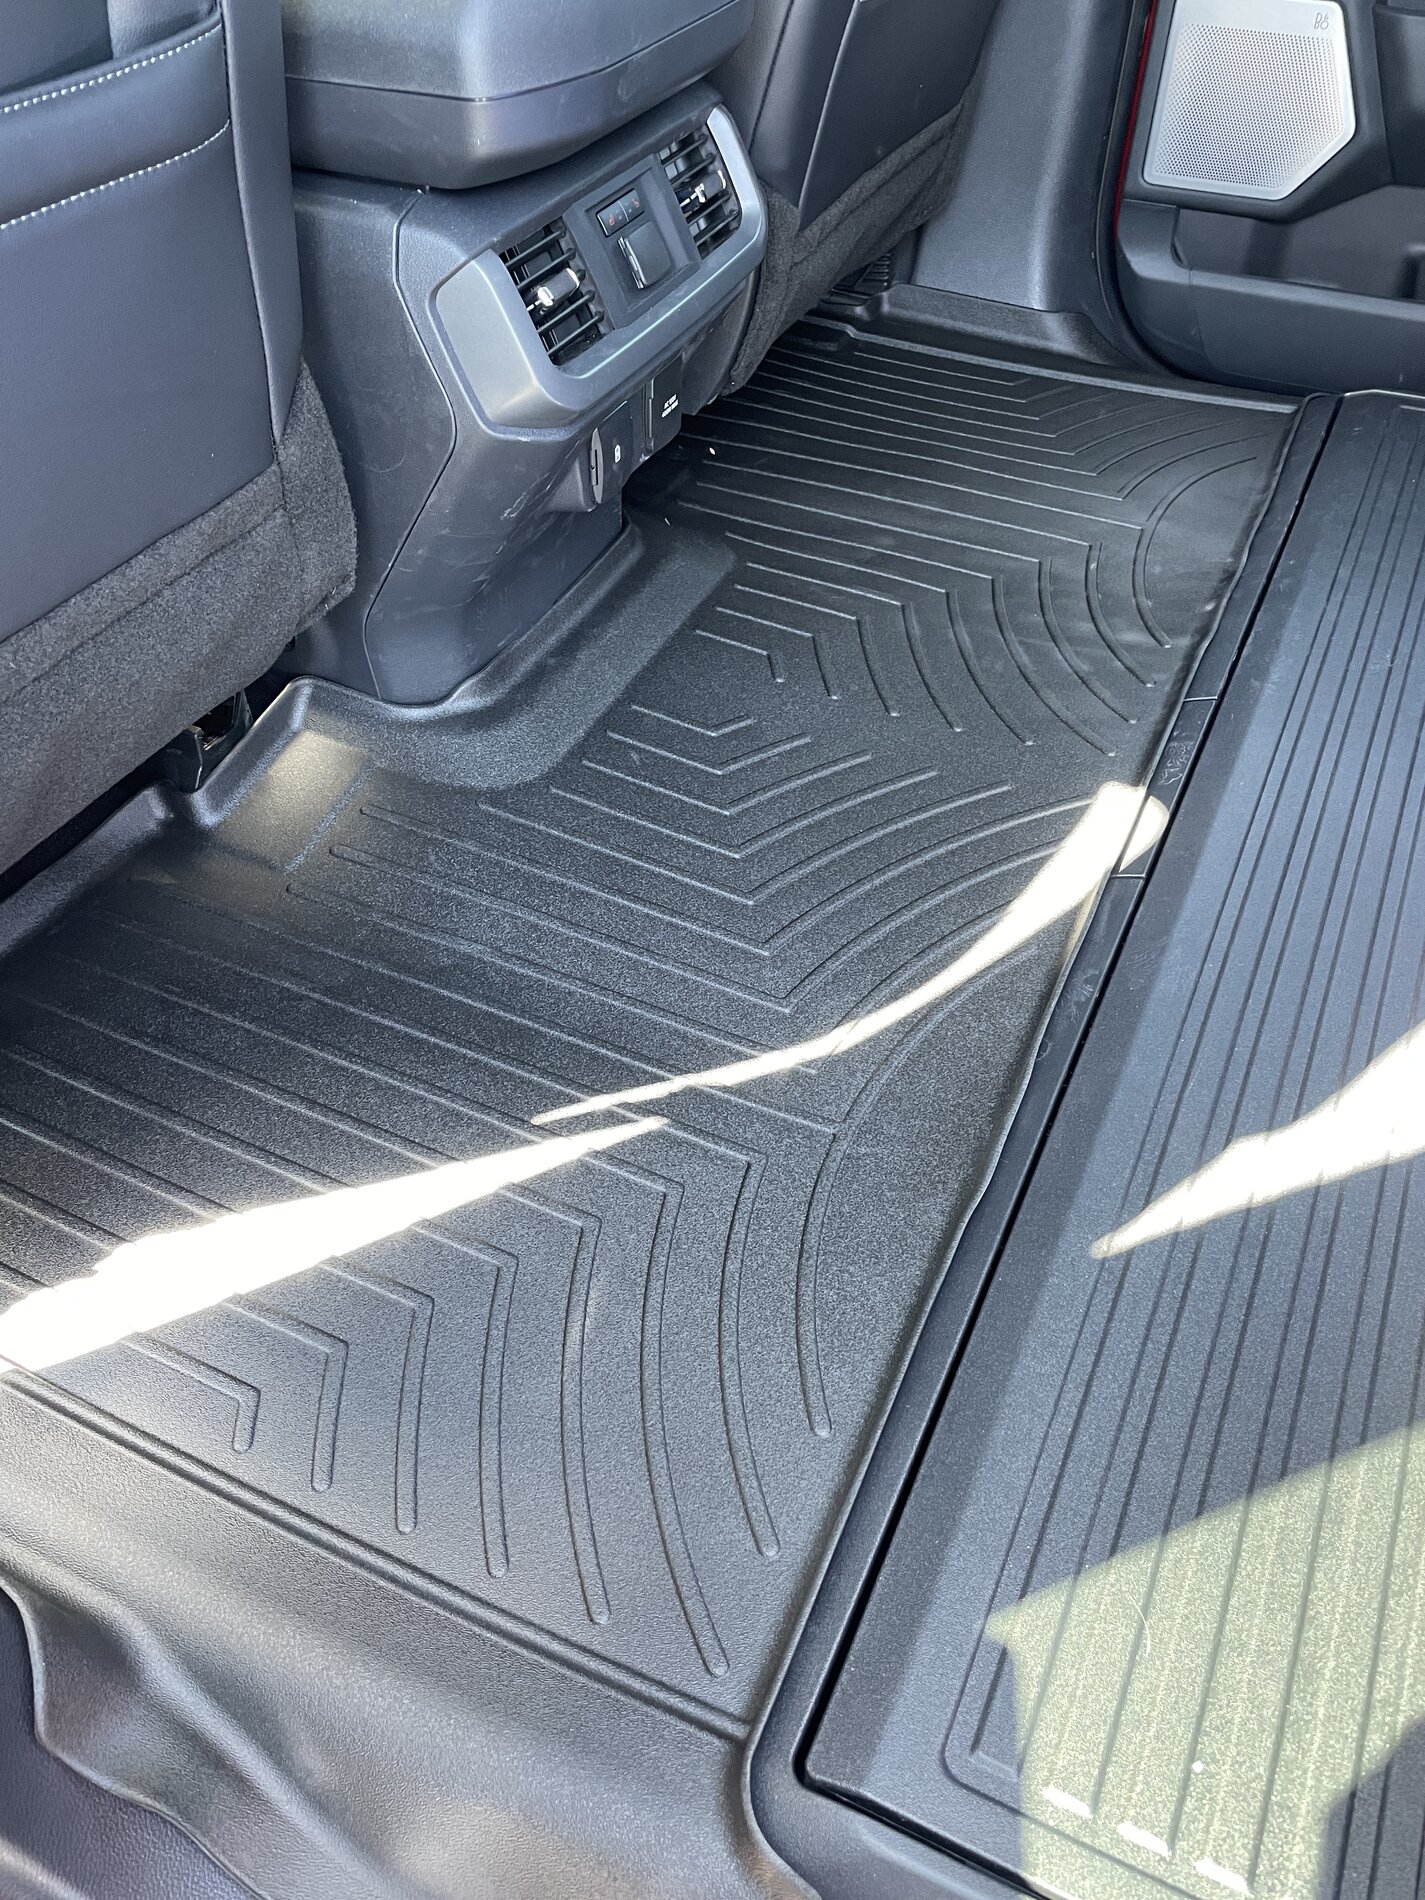 Ford F-150 Non-OEM floor mats and rear storage box IMG_5414.JPG